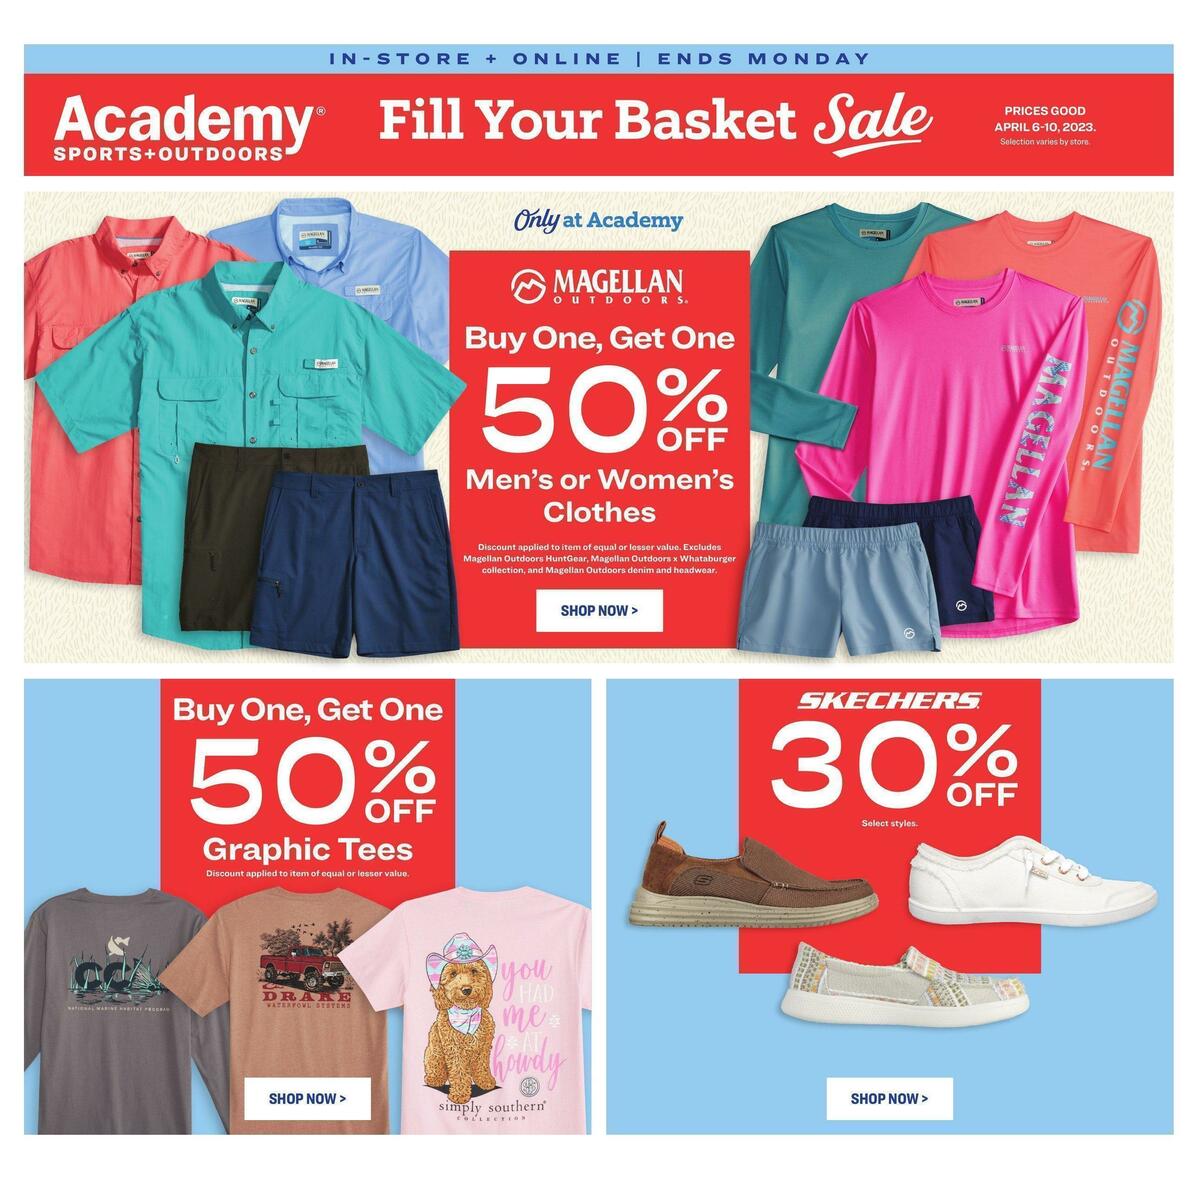 Academy Sports + Outdoors 4Day Sale Weekly Ads and Circulars from April 6